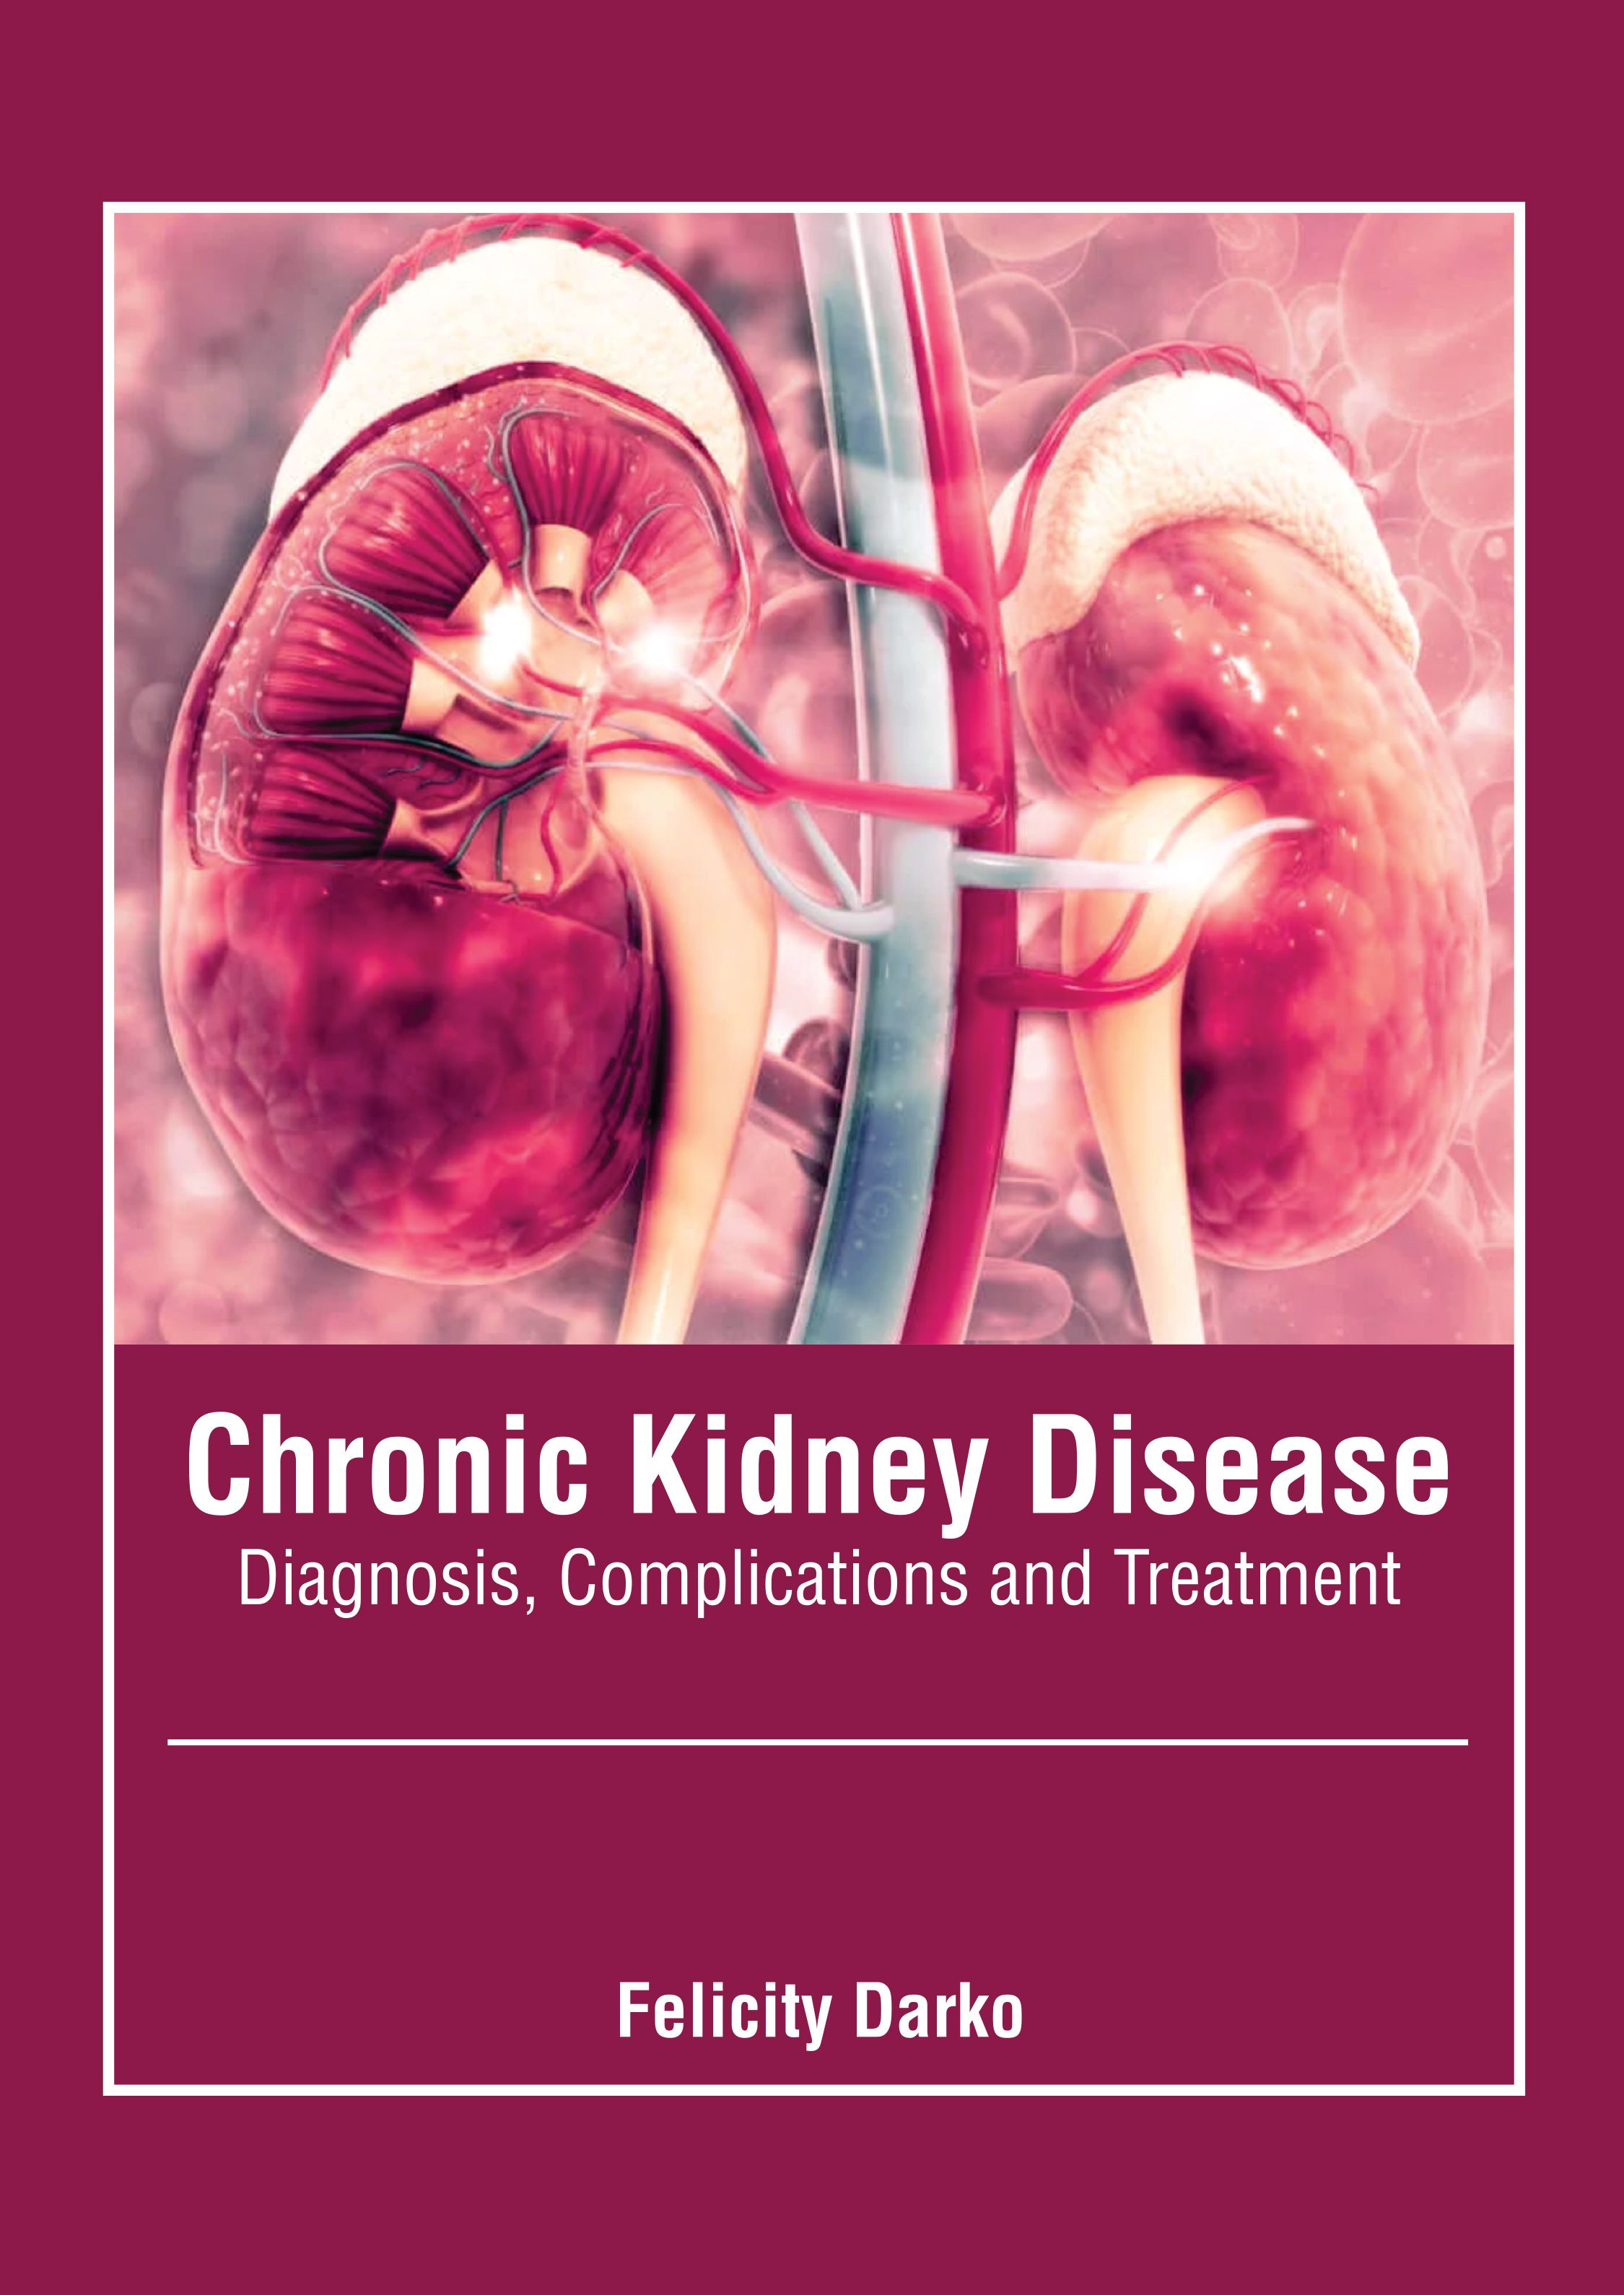 CHRONIC KIDNEY DISEASE: DIAGNOSIS, COMPLICATIONS AND TREATMENT